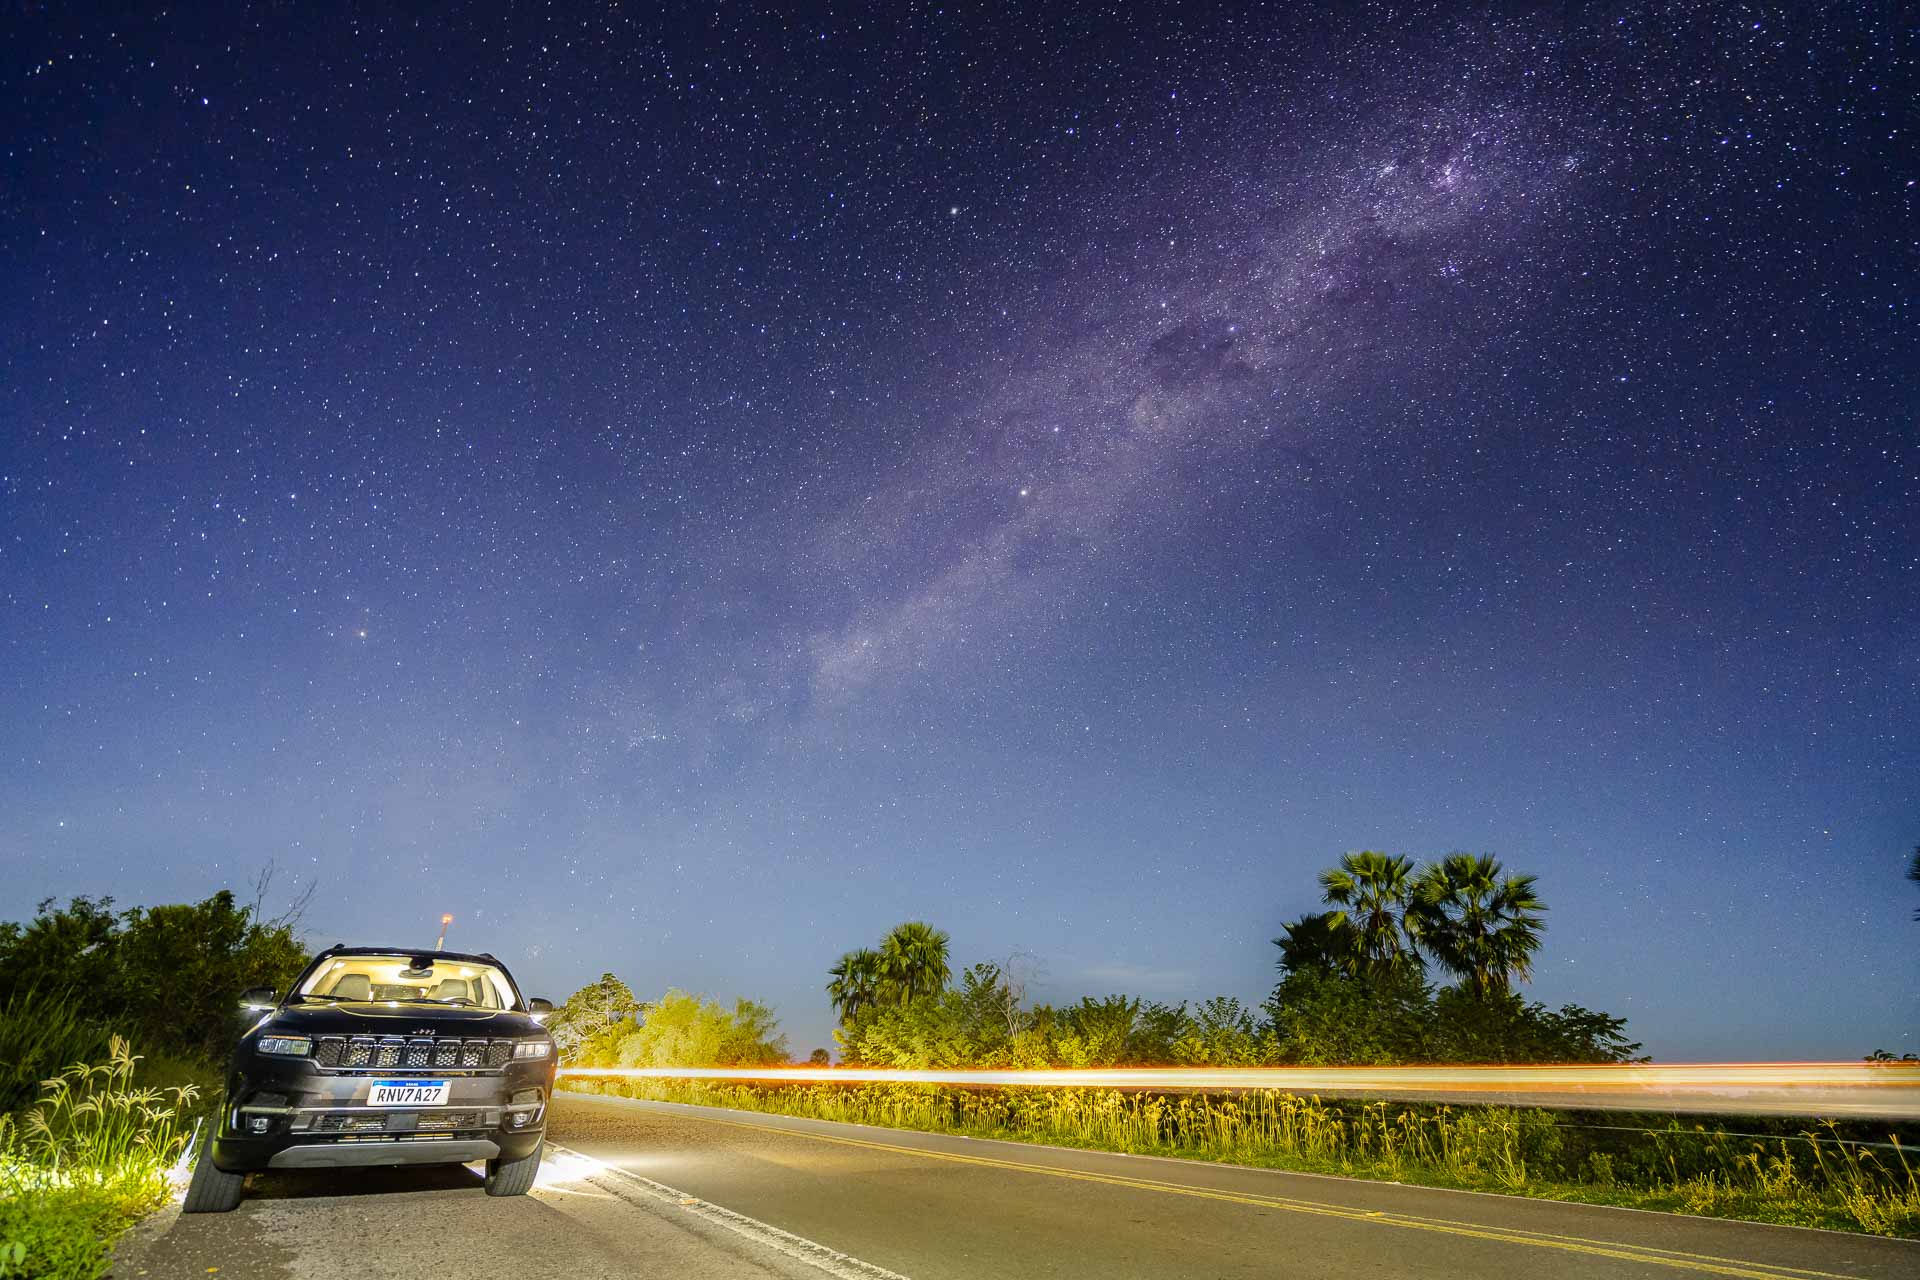 A car on the side of the road at night with the milk way in the sky of Pantanal in Brazil